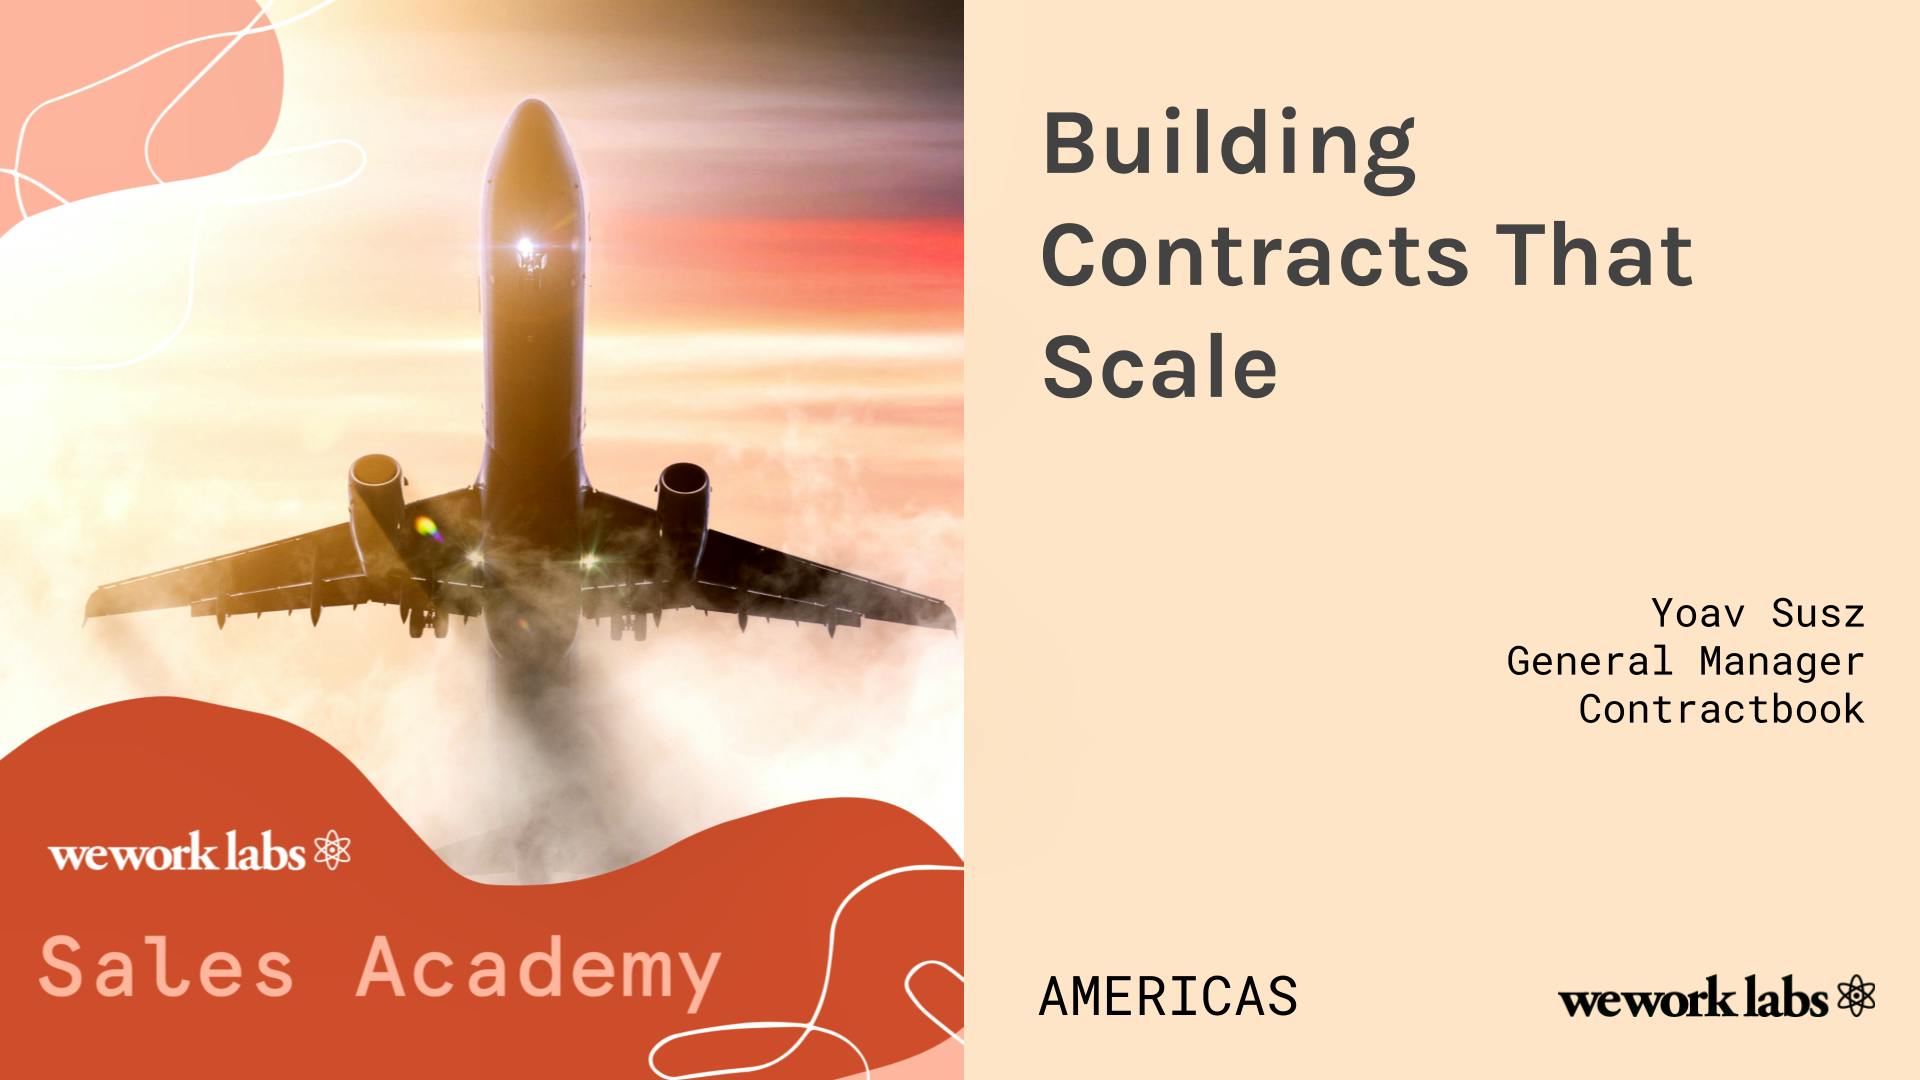 Sales Academy (Americas): How to Build, Structure, and Organize Contracts That Scale